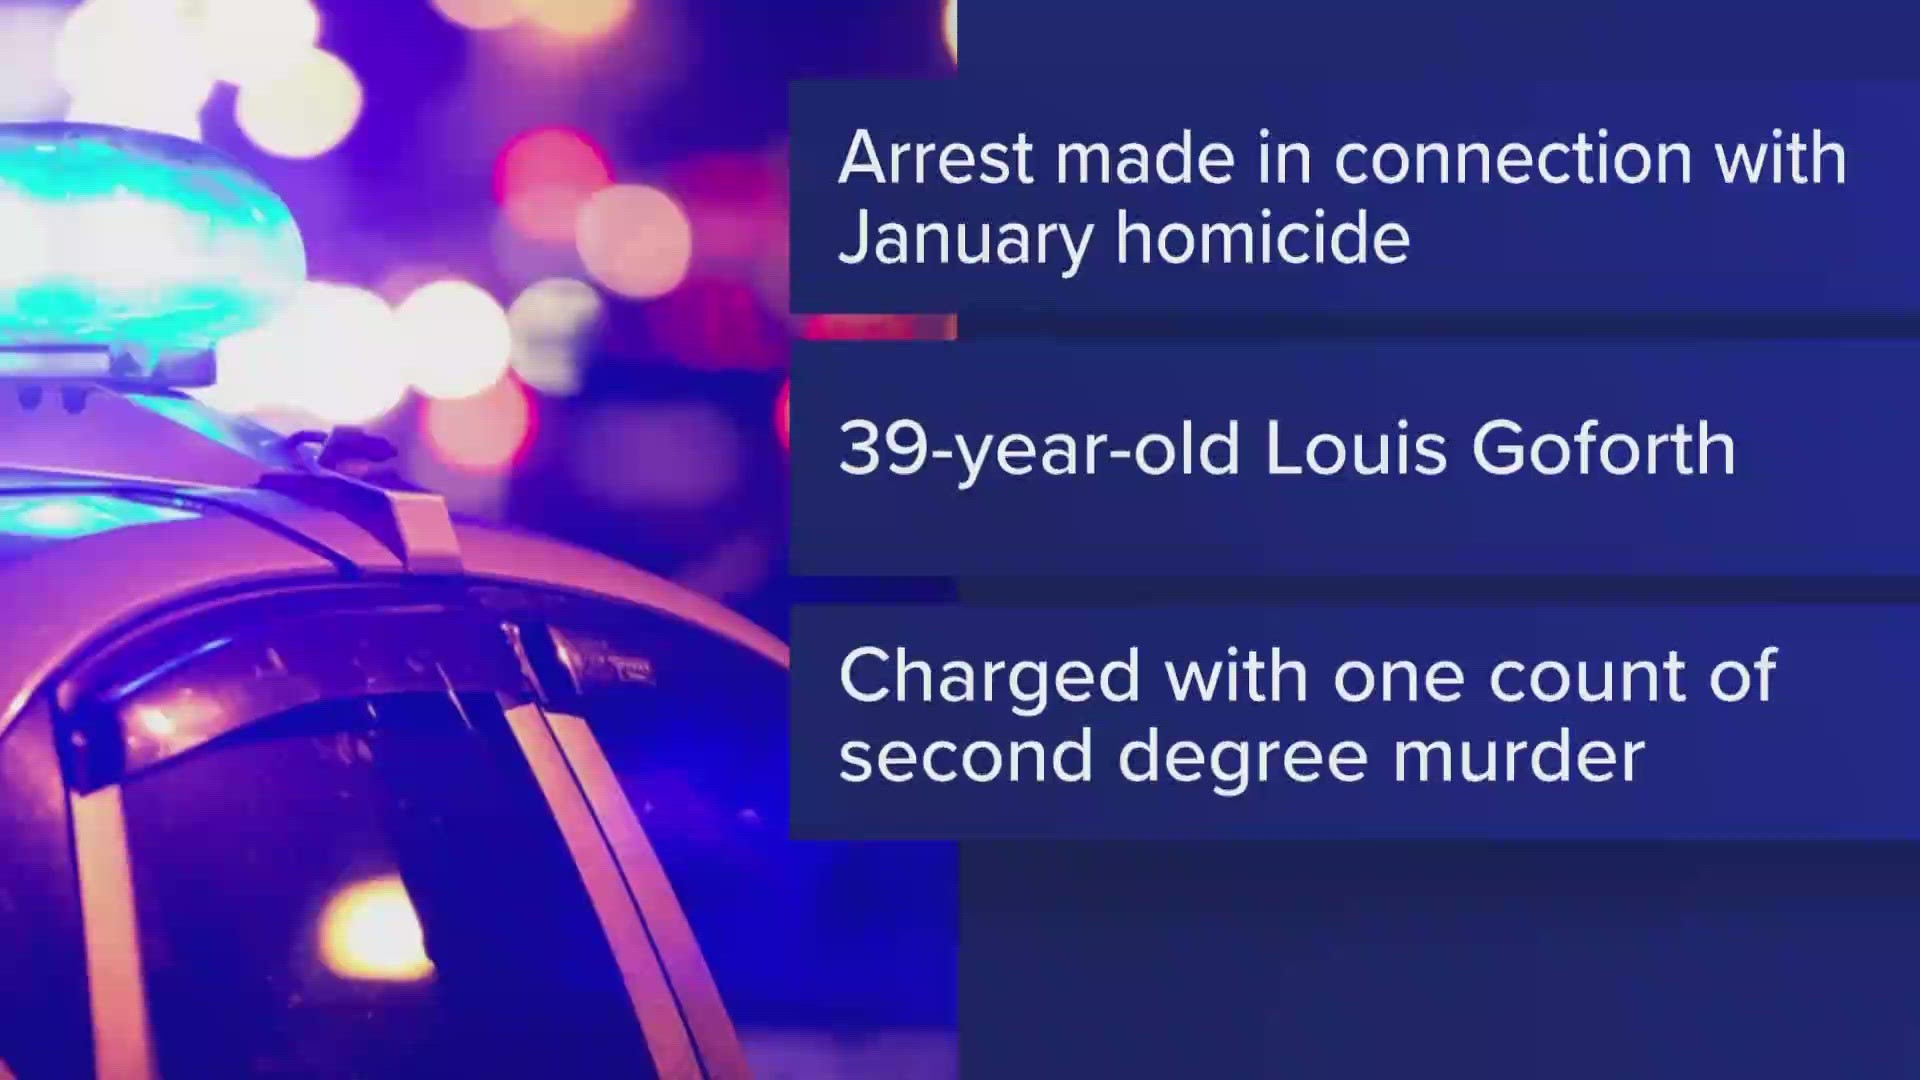 Louis Goforth faces a second-degree murder charge, Buffalo Police said in a statement issued Thursday evening.